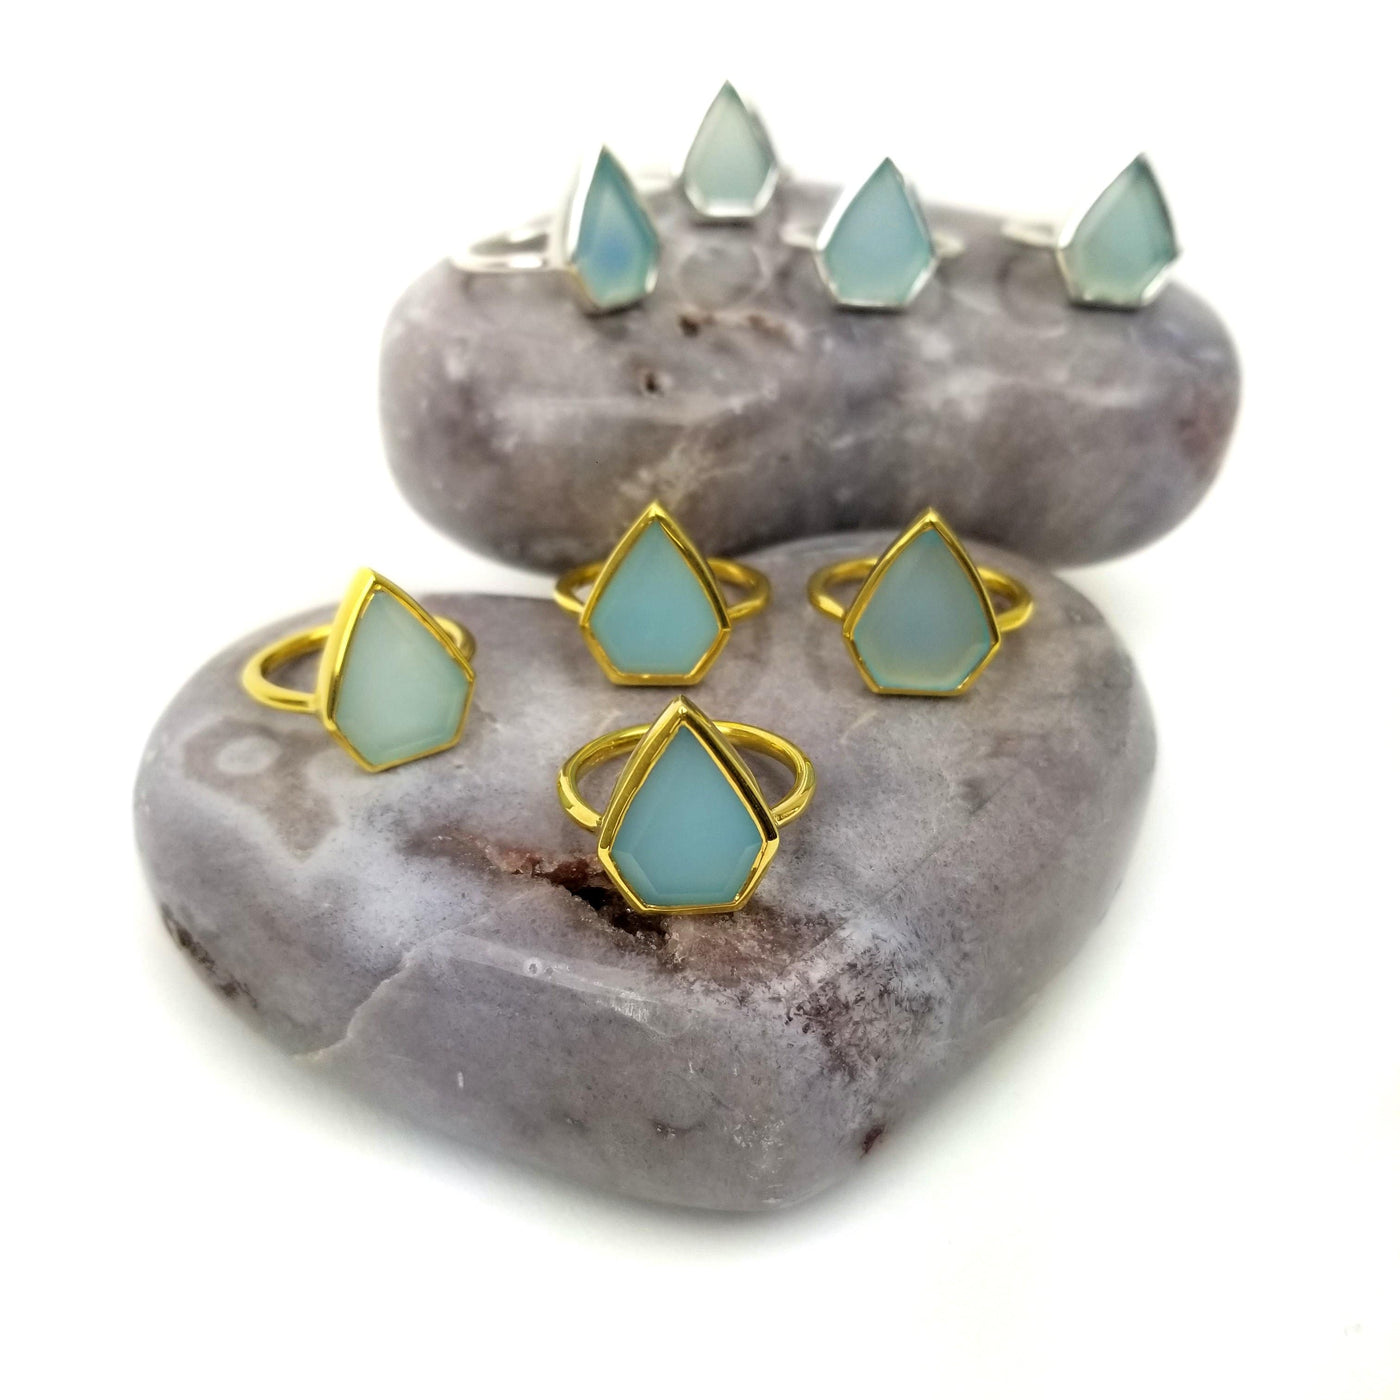 8 Aqua Chalcedony Arrowhead Stone rings in gold and silver with decorations